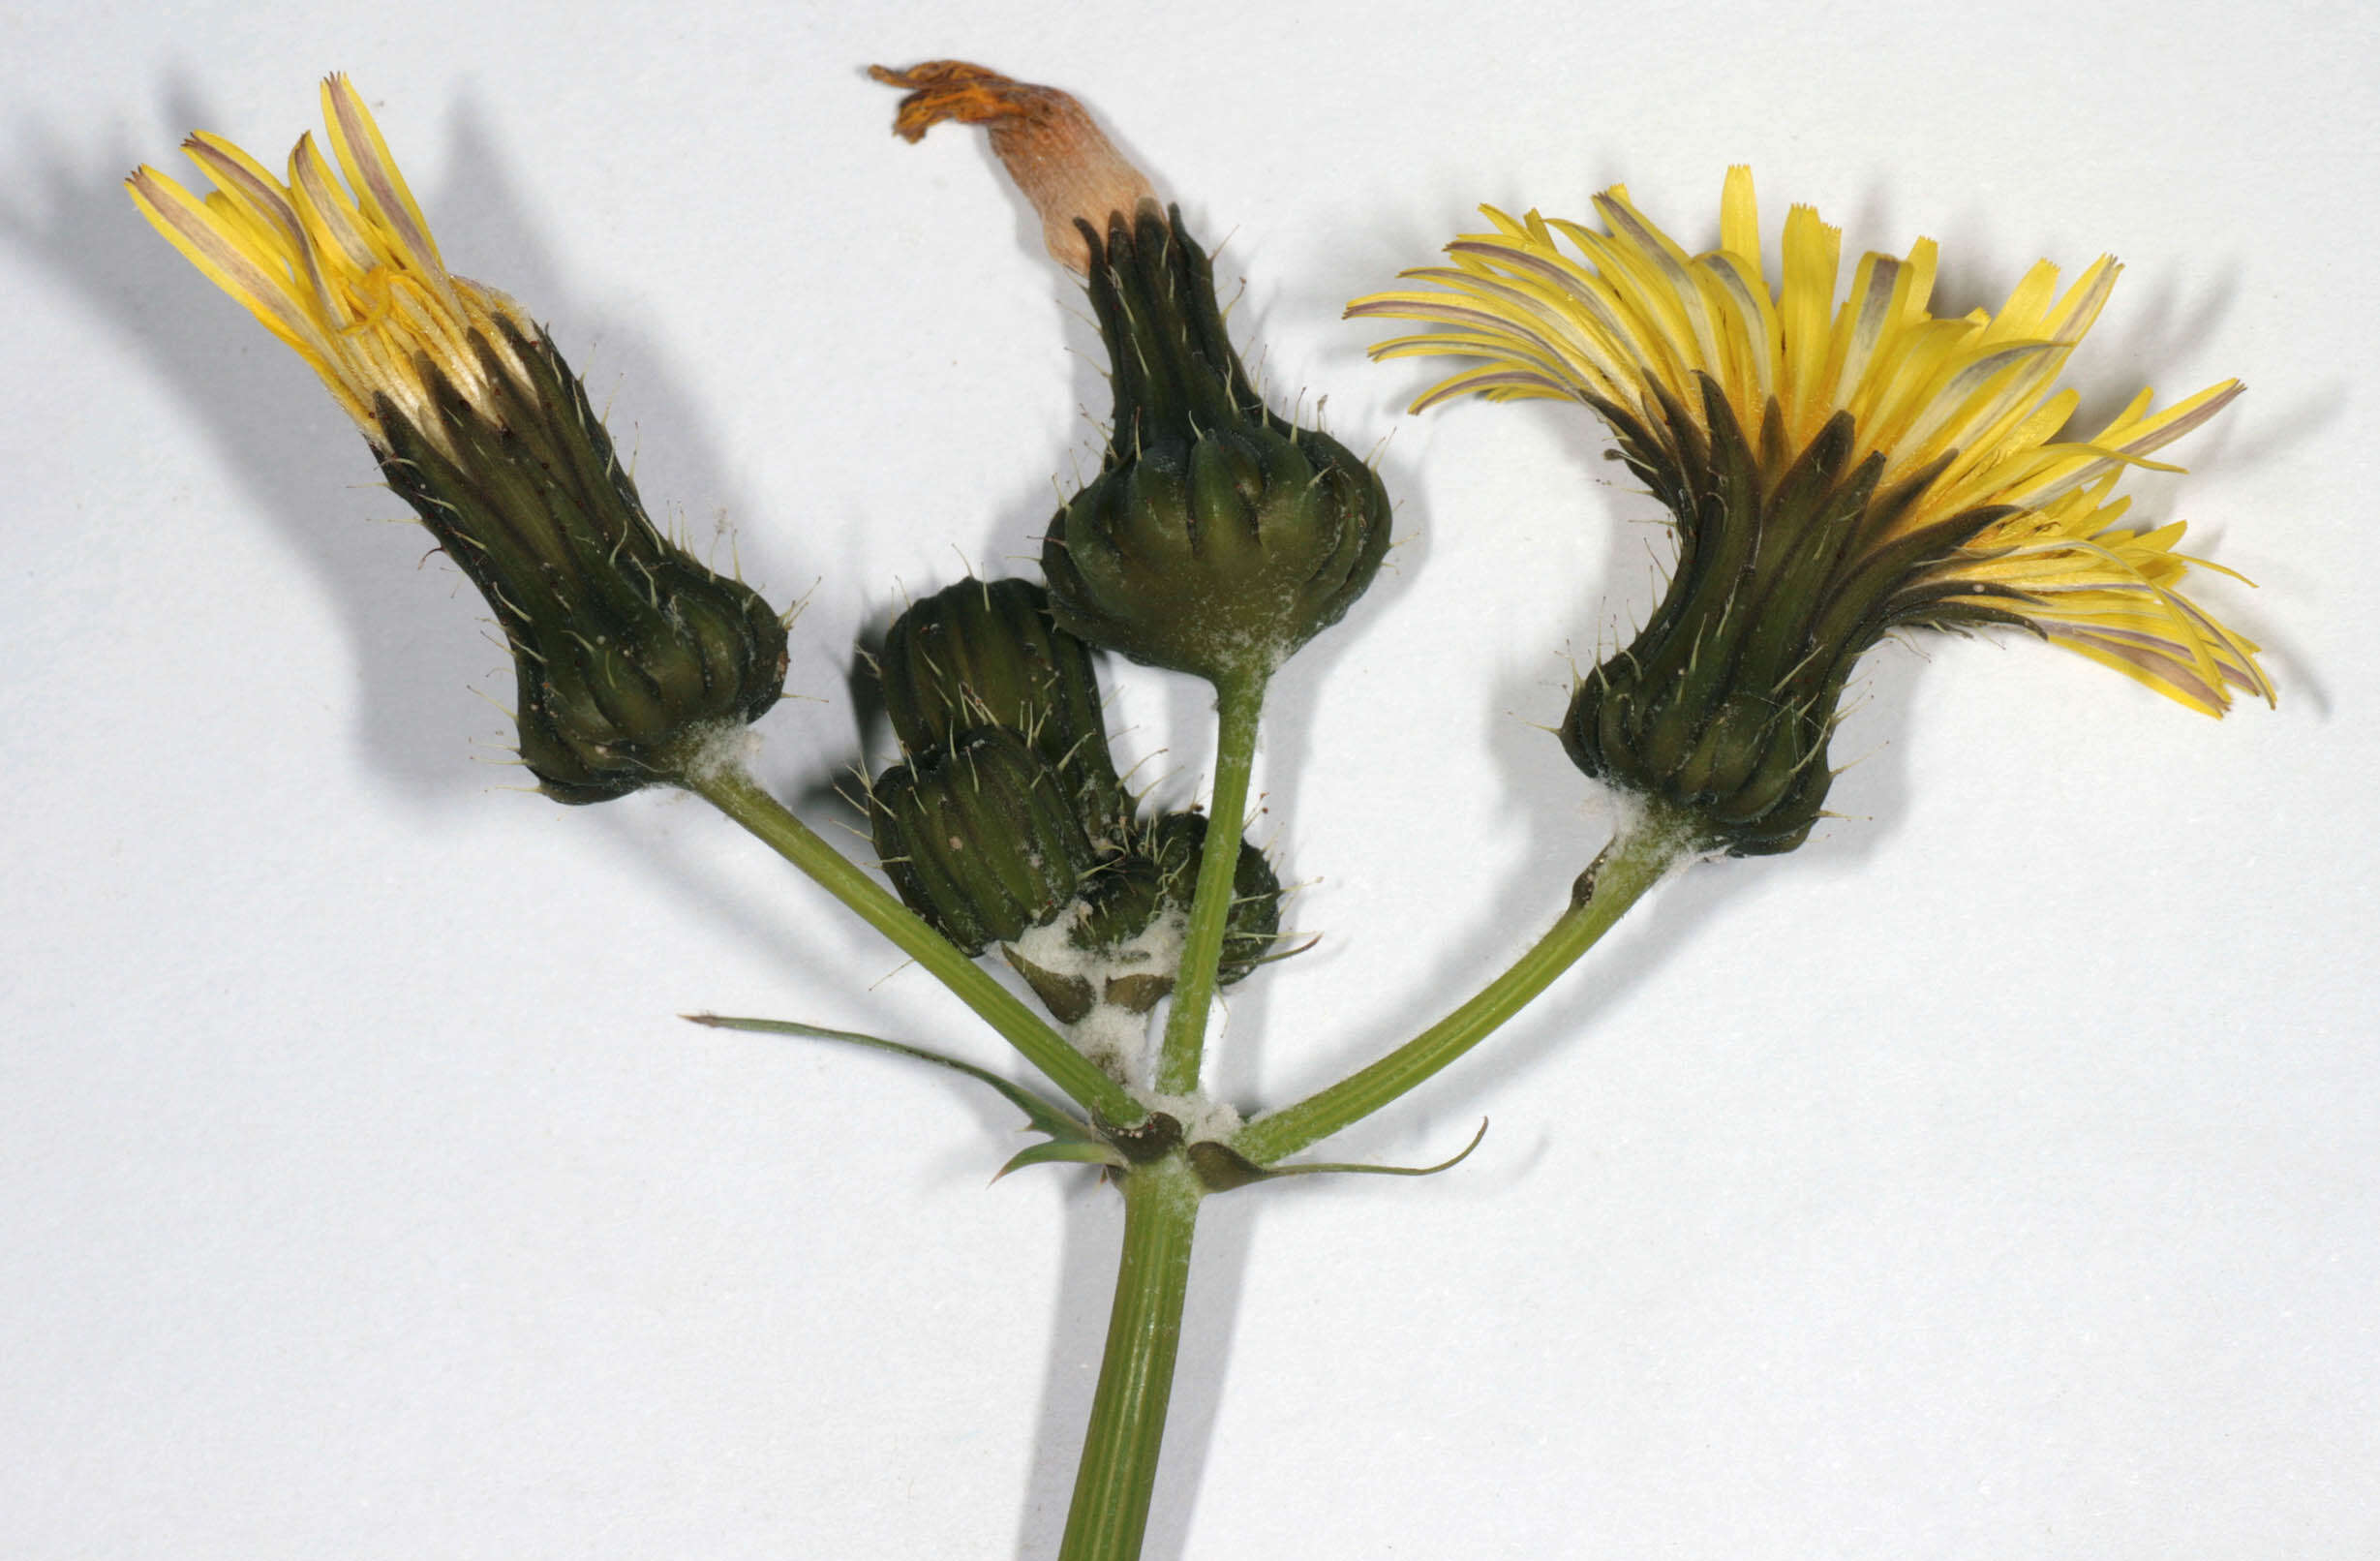 Image of common sowthistle